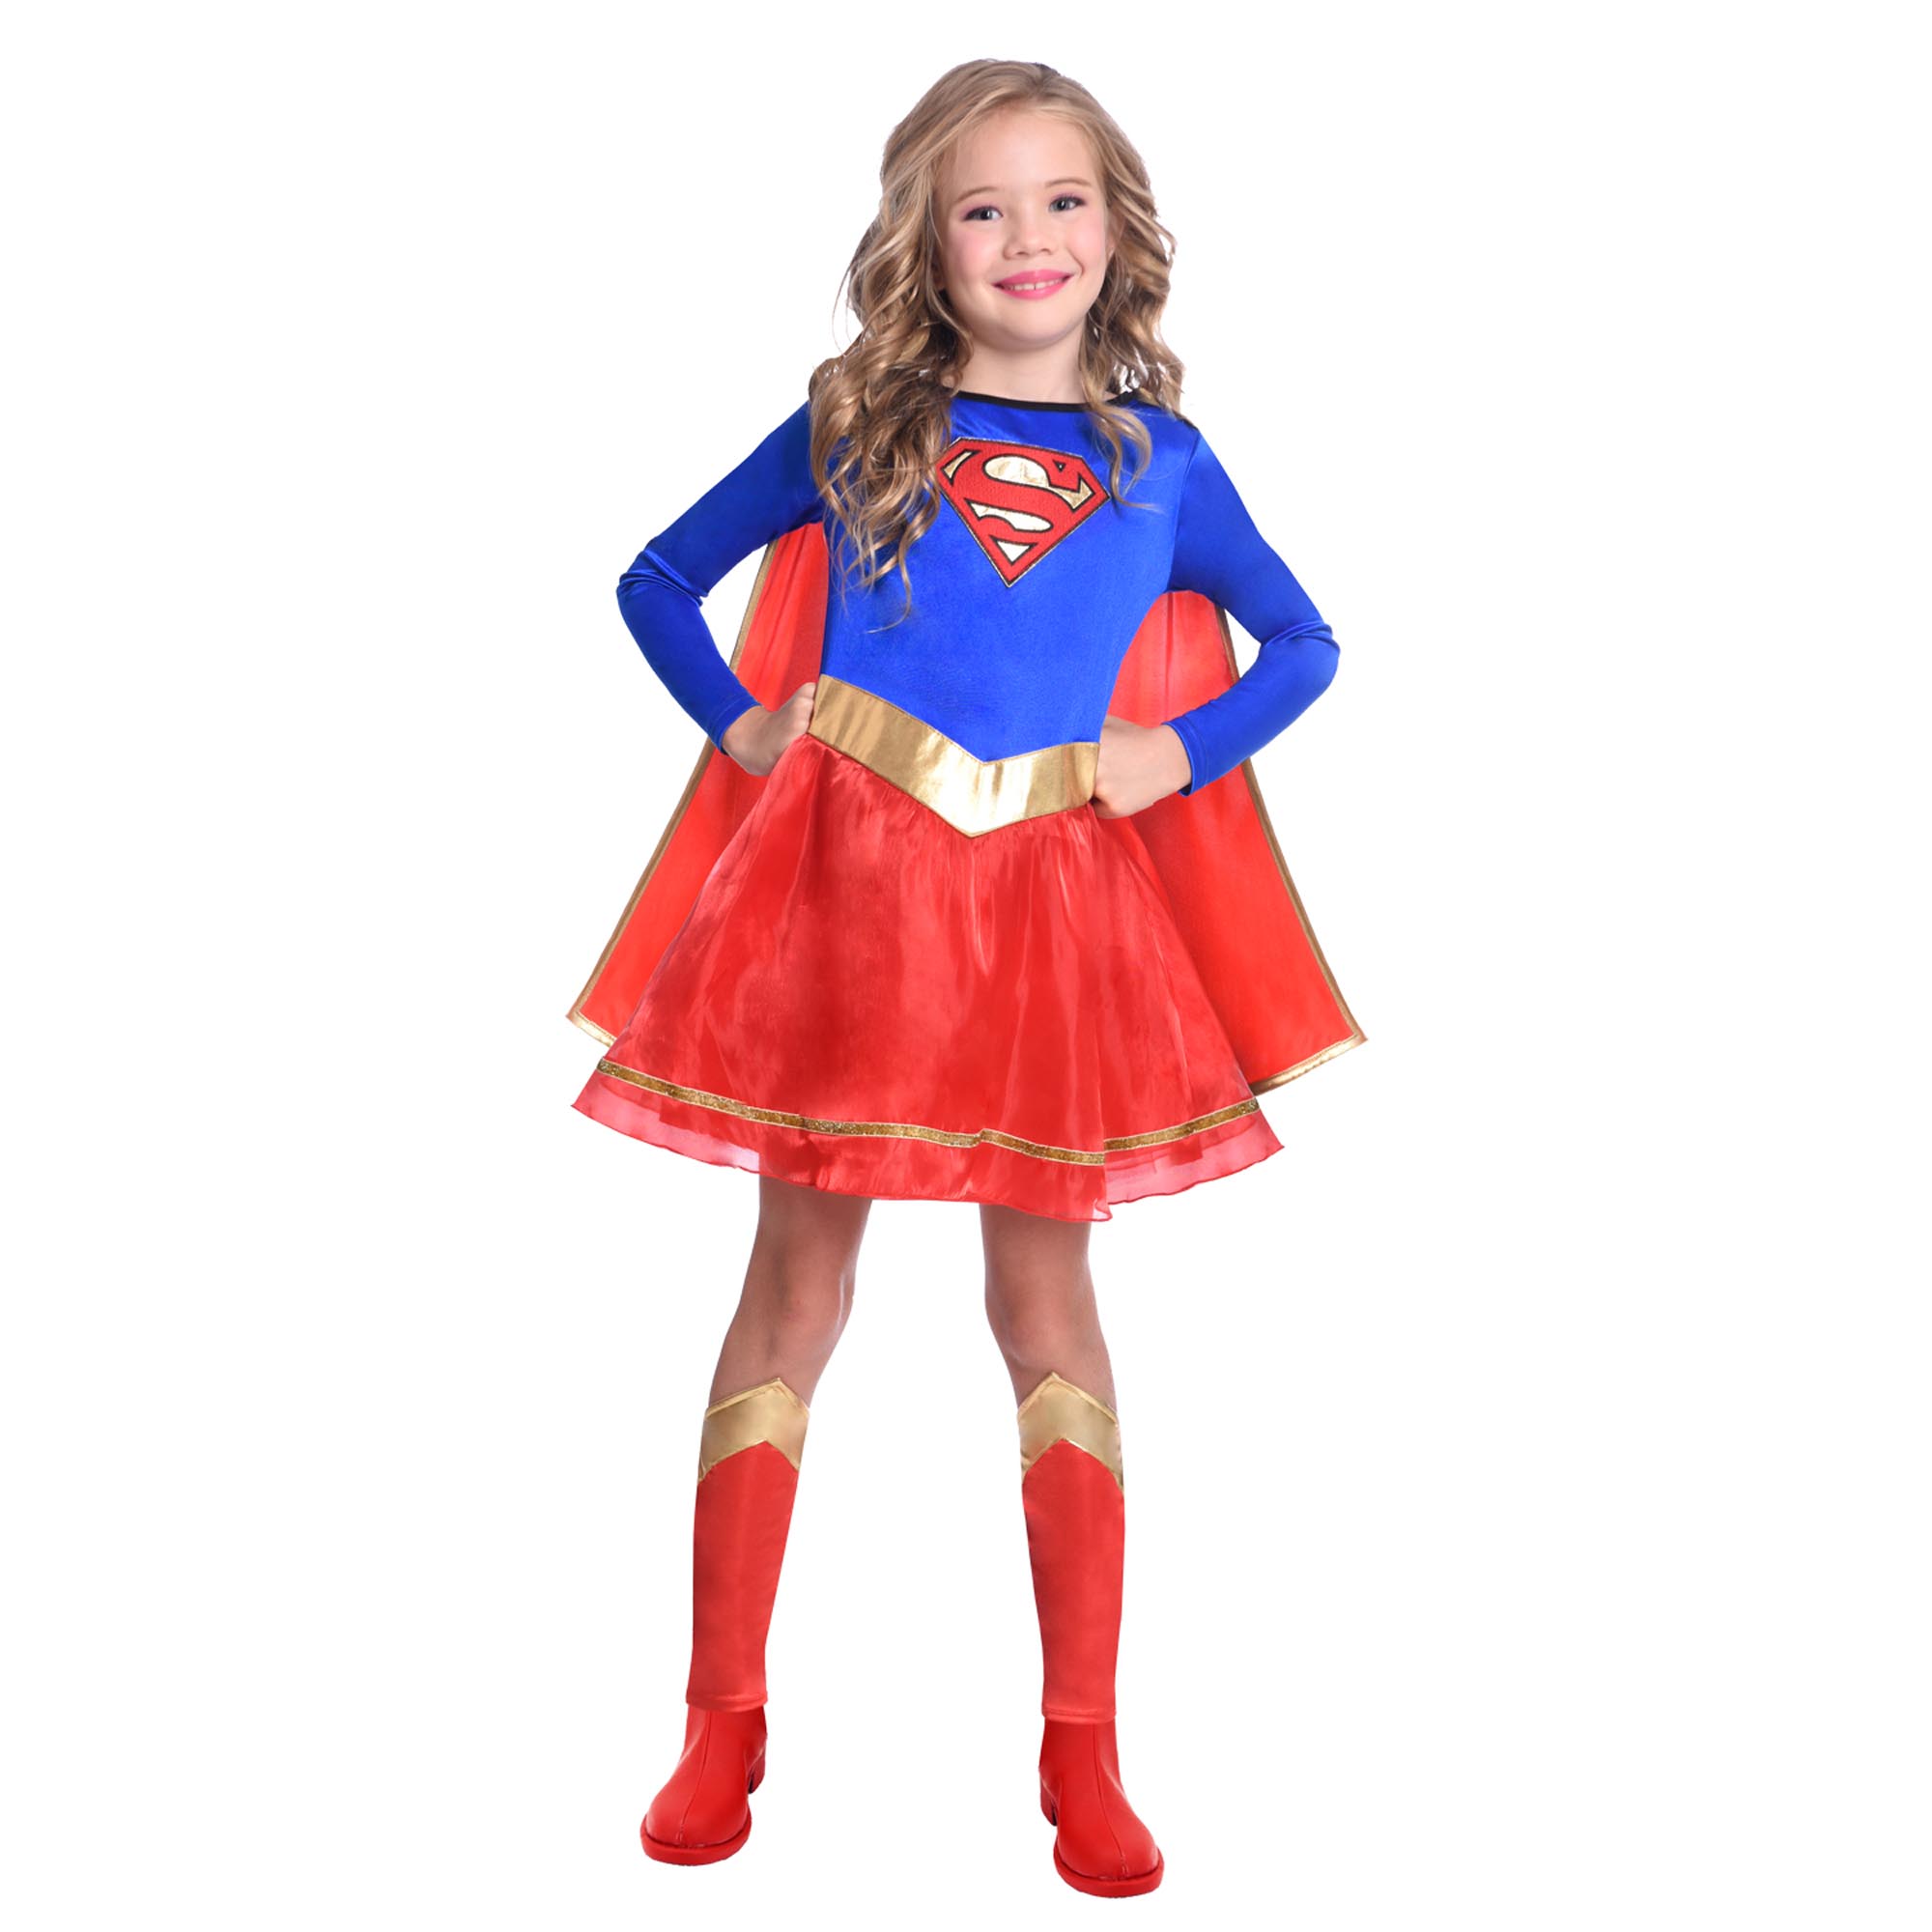 Official Supergirl Classic Children's Fancy Dress Costume